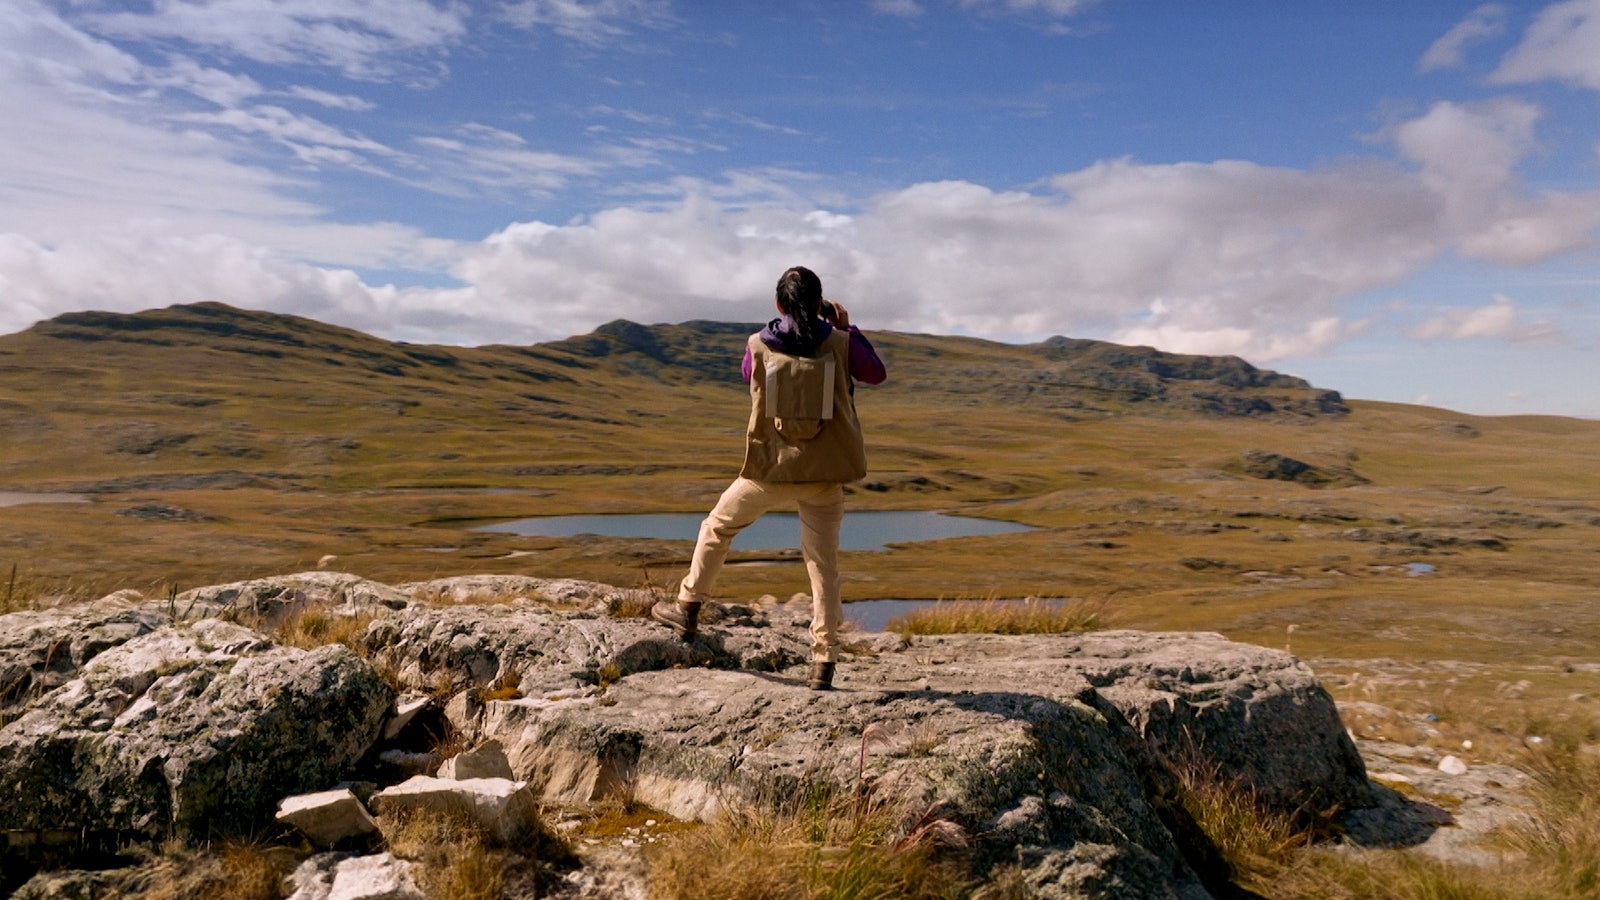 A woman stands on a rock with her back to the camera amidst the brown-green grass of the Andes mountain range.